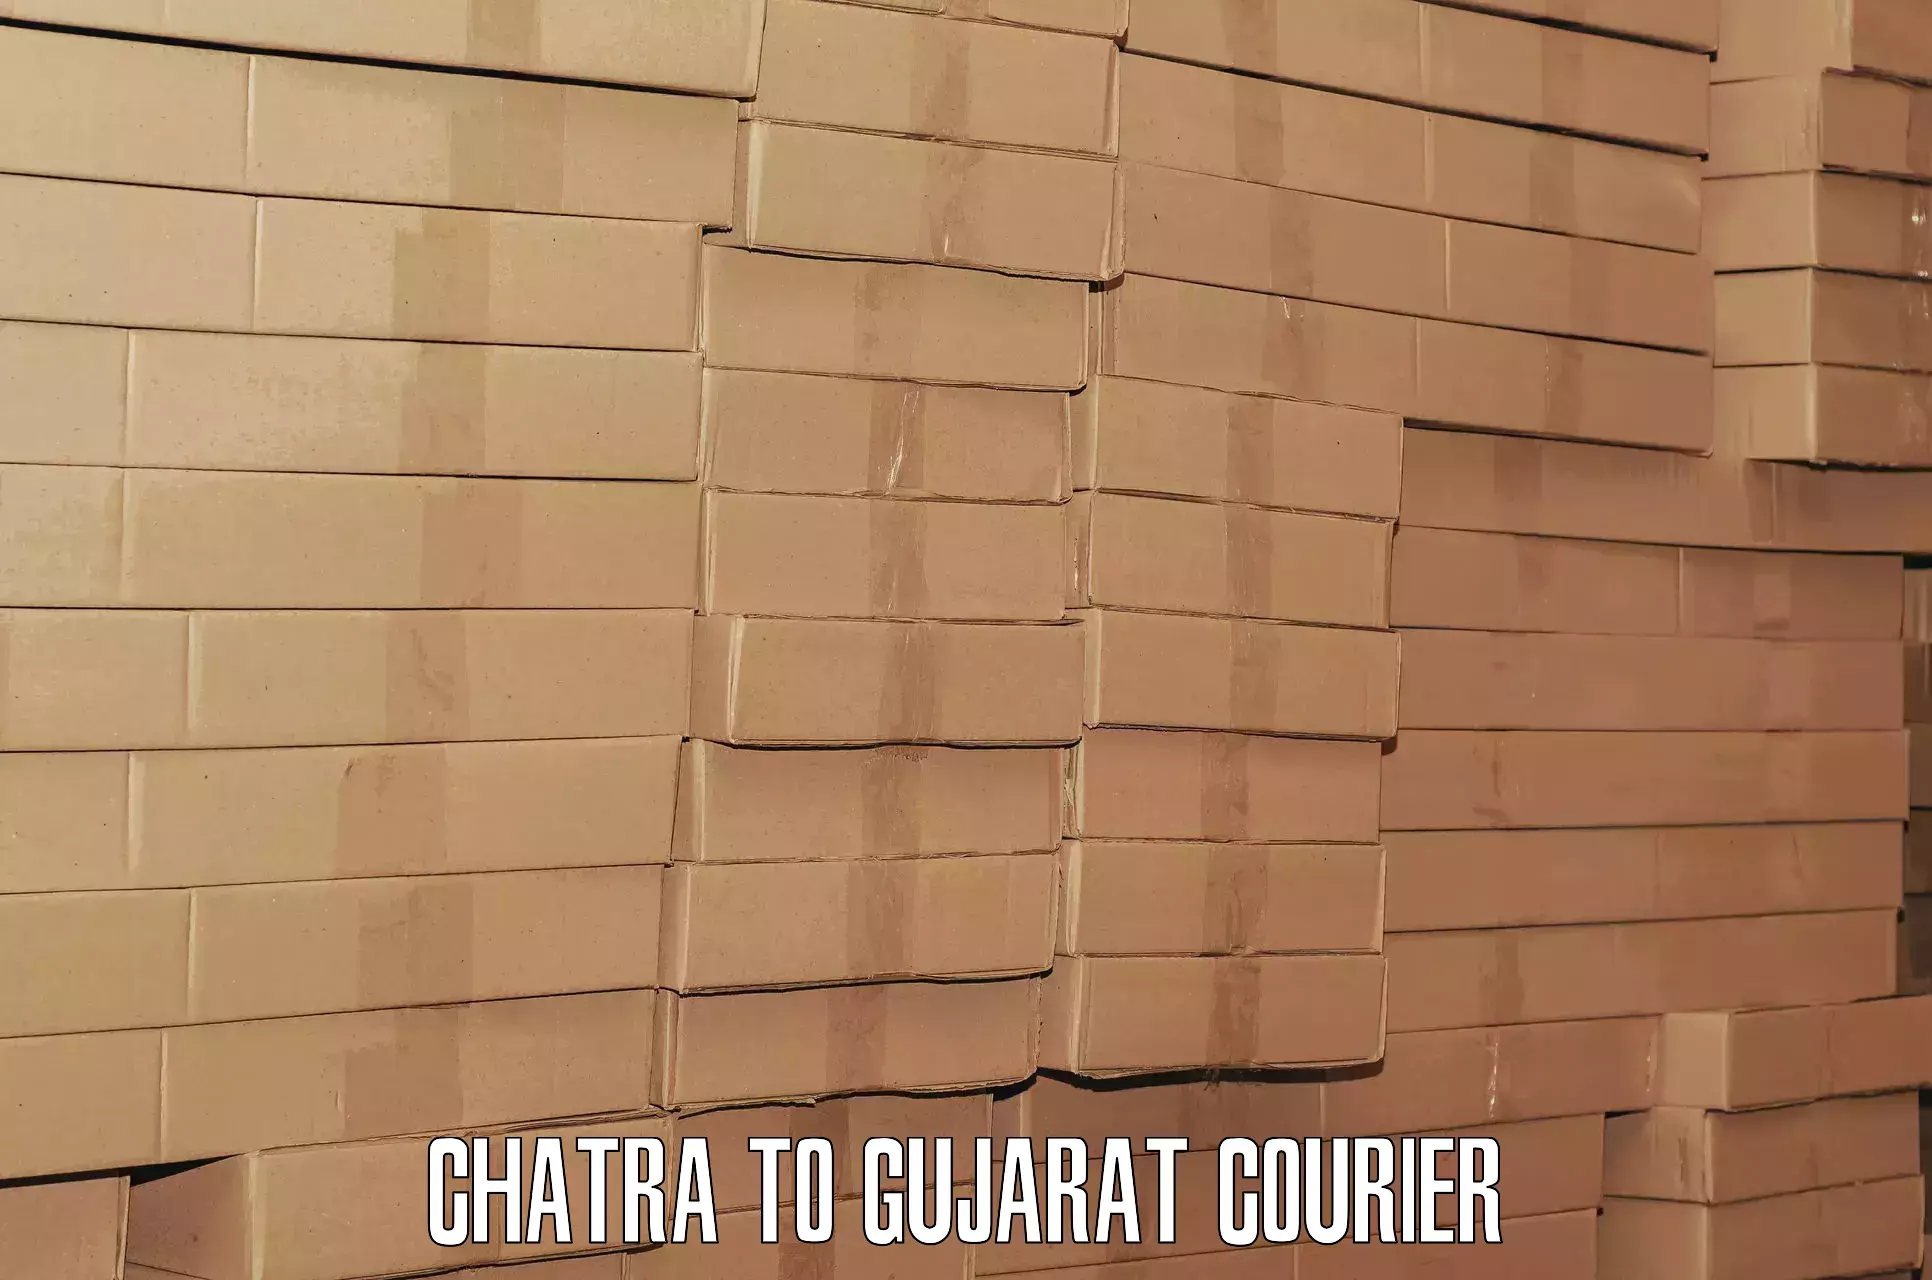 Baggage transport network Chatra to Gujarat